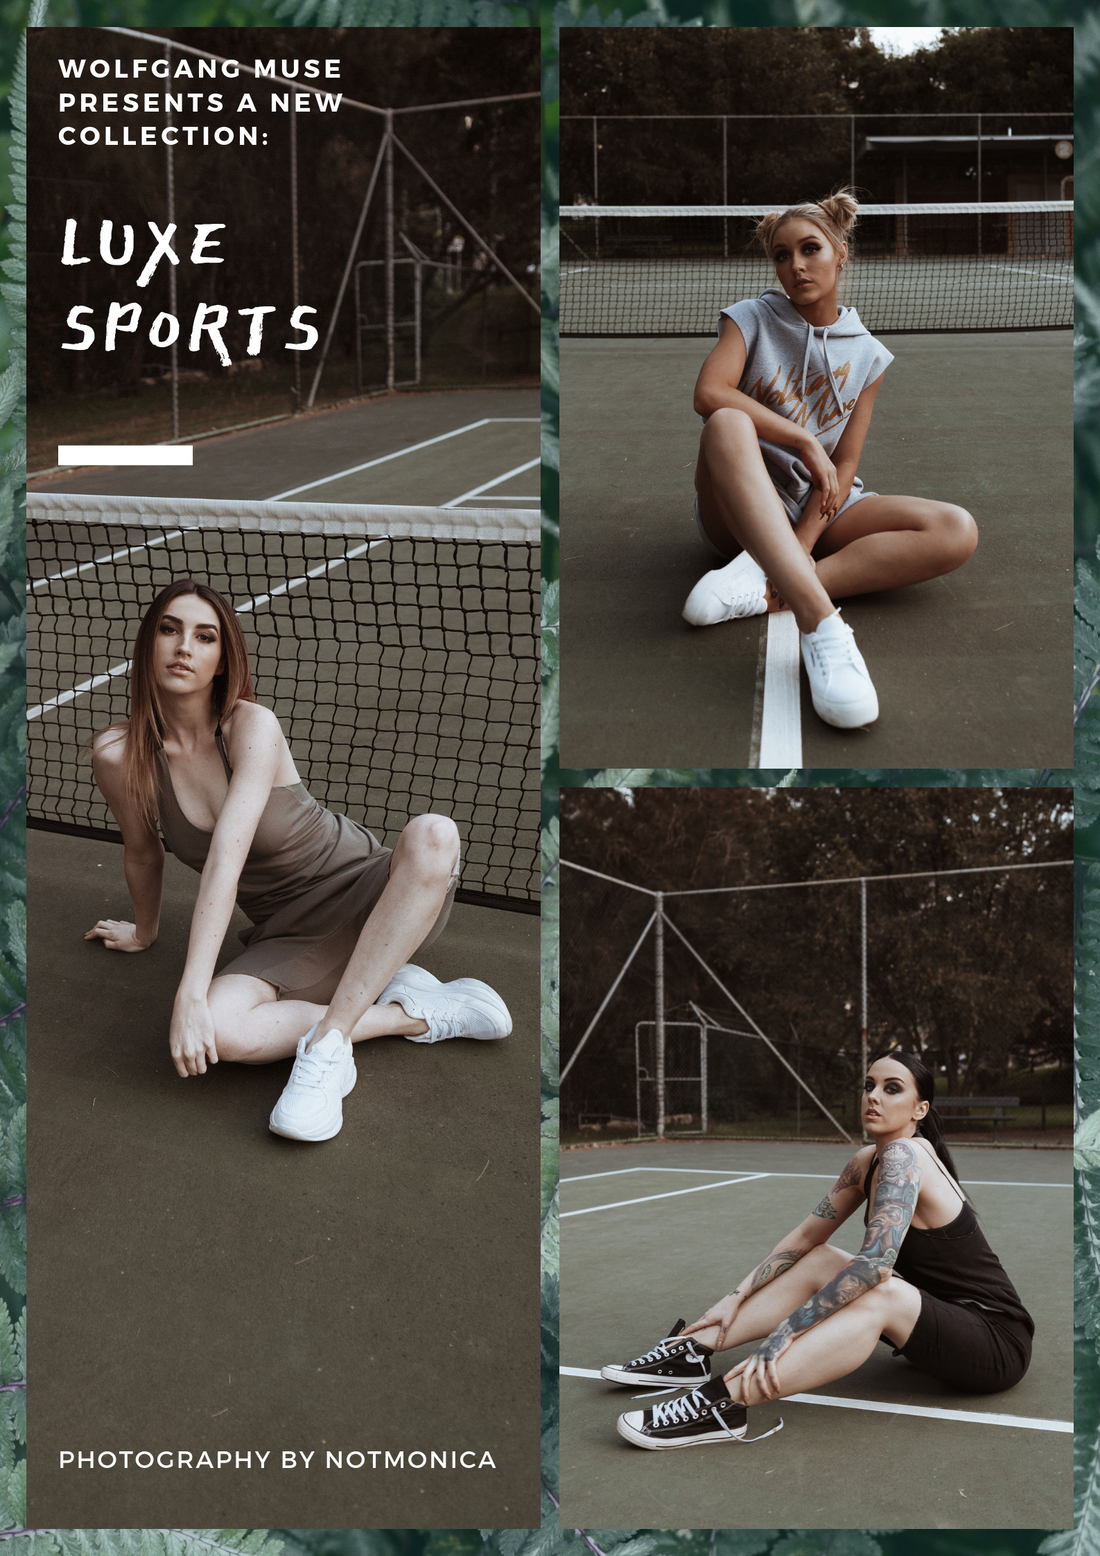 LUXE SPORTS